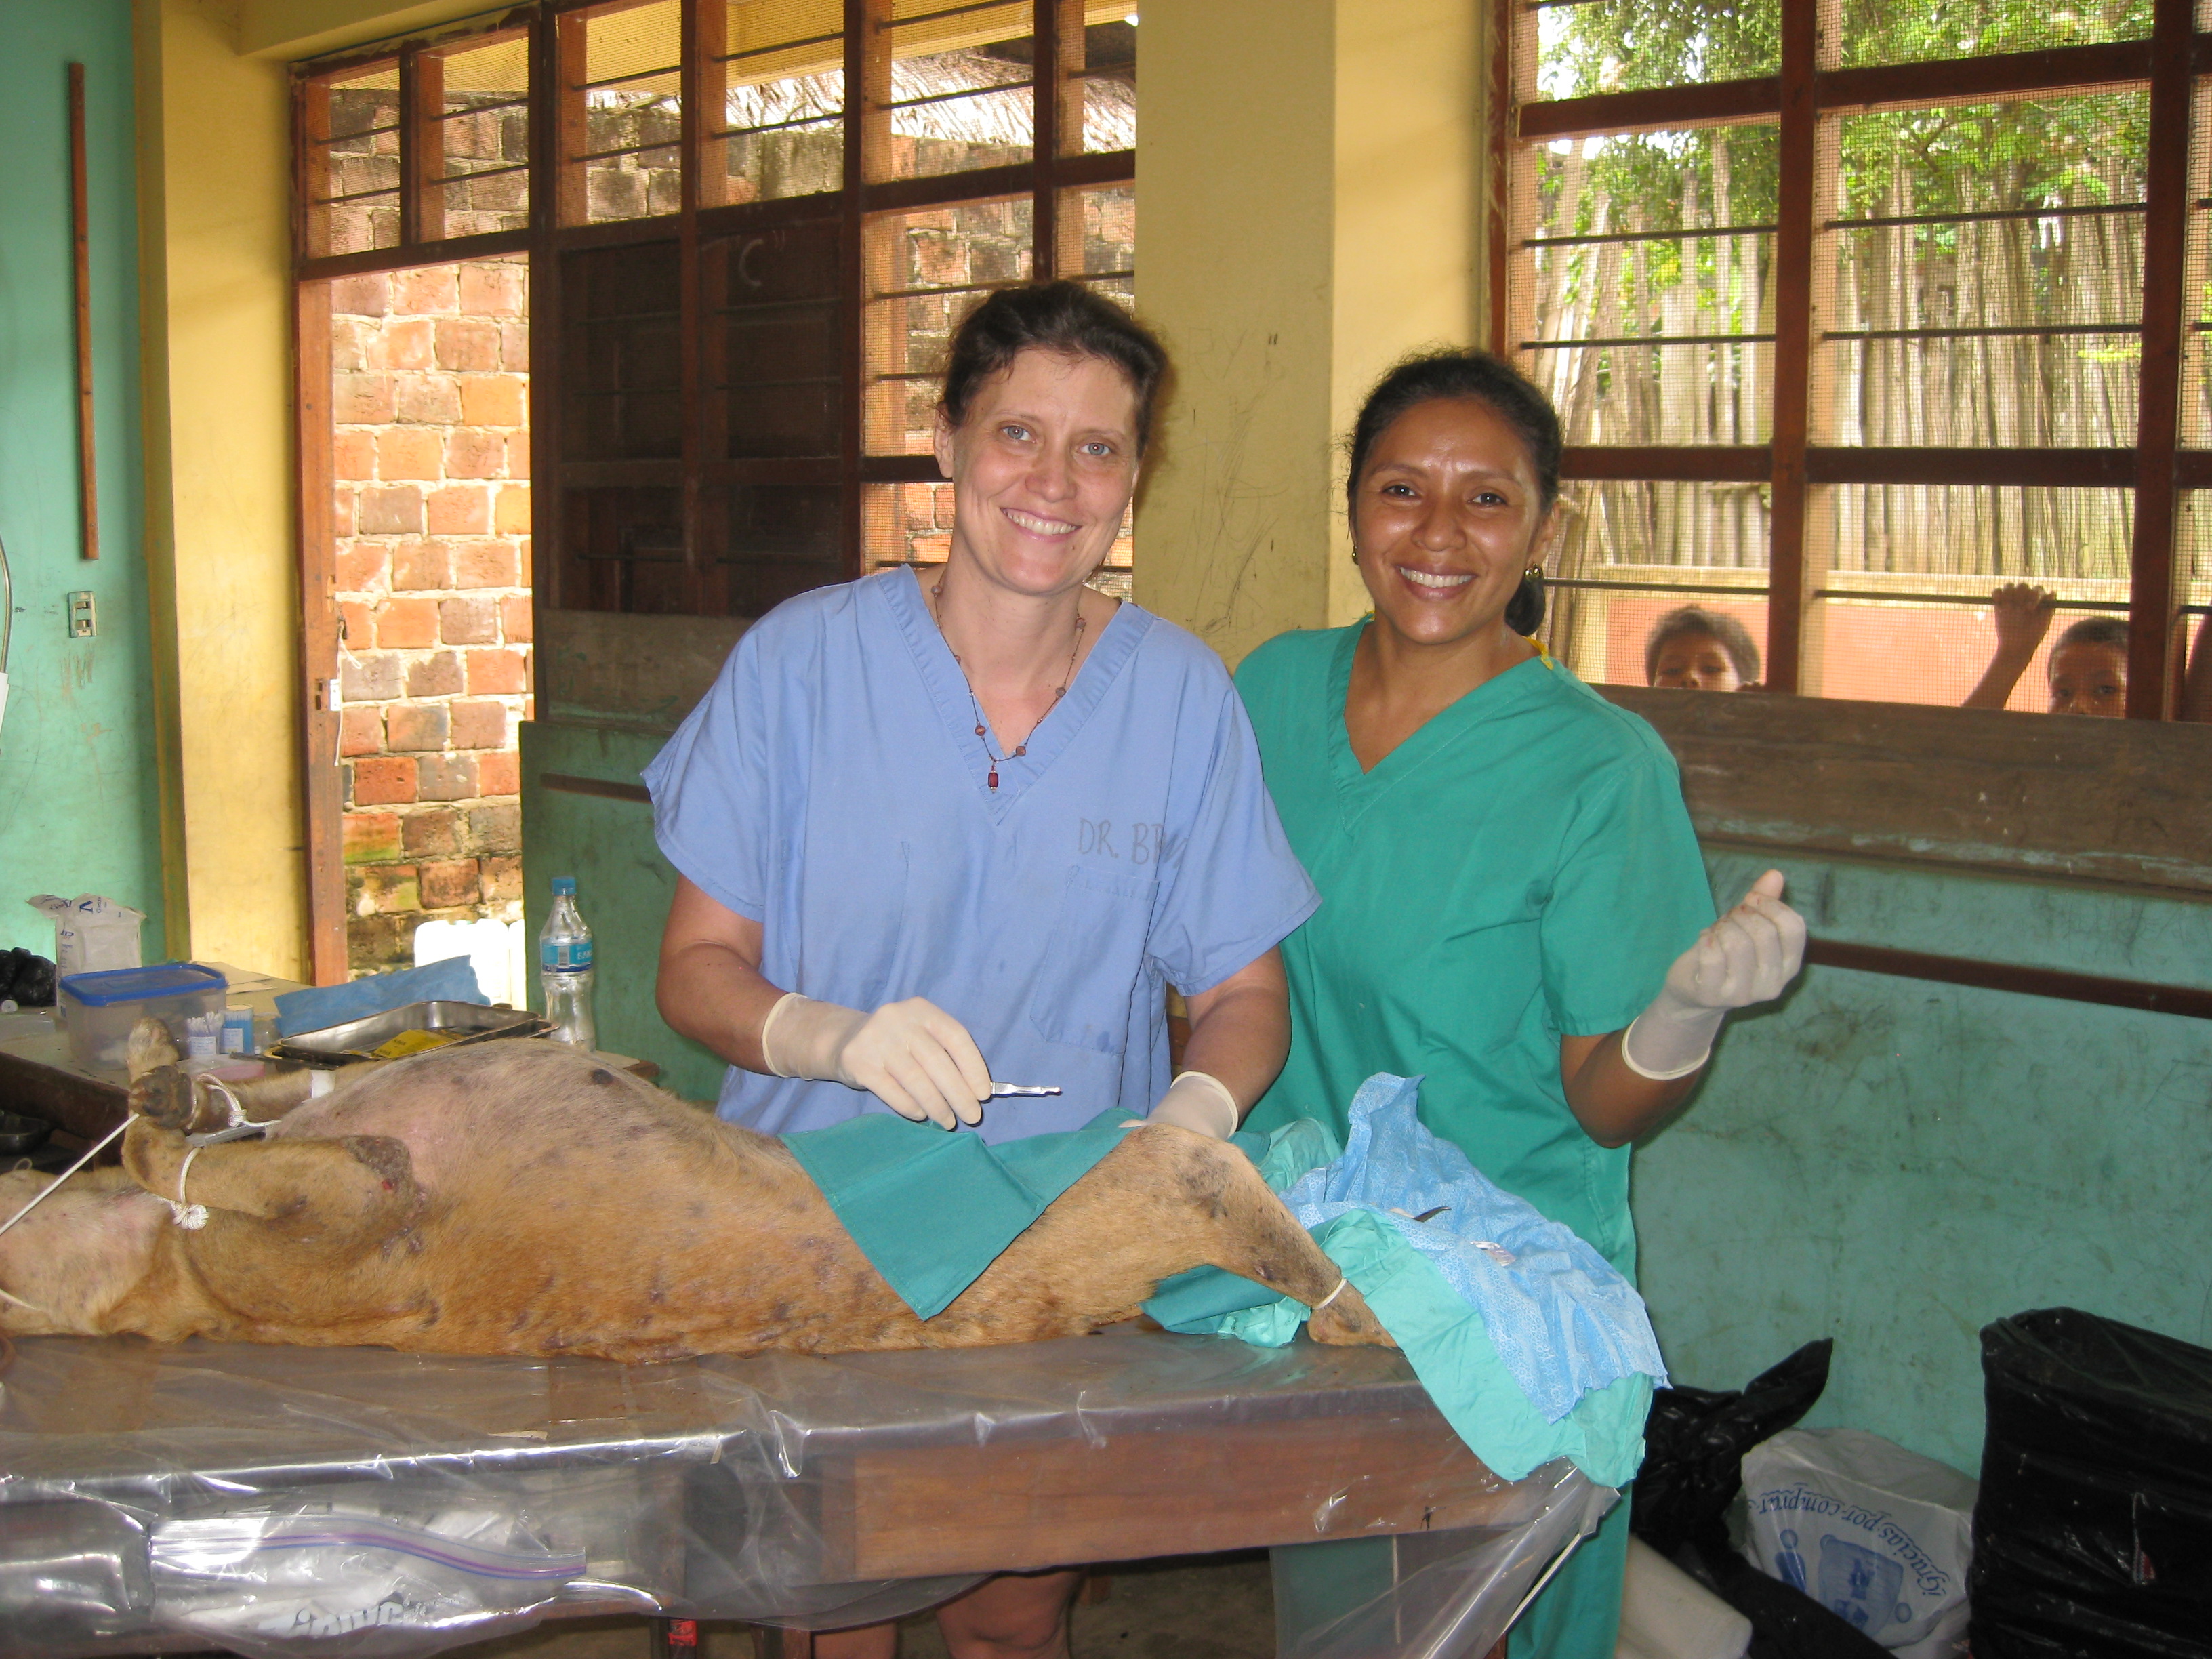 Dr. Jennifer Brown performs surgery on a patient in Requeña, Peru, with the assistance of Esther Peña, a Peruvian veterinarian associated with Amazon Cares, an animal welfare group in Iquitos, Peru.